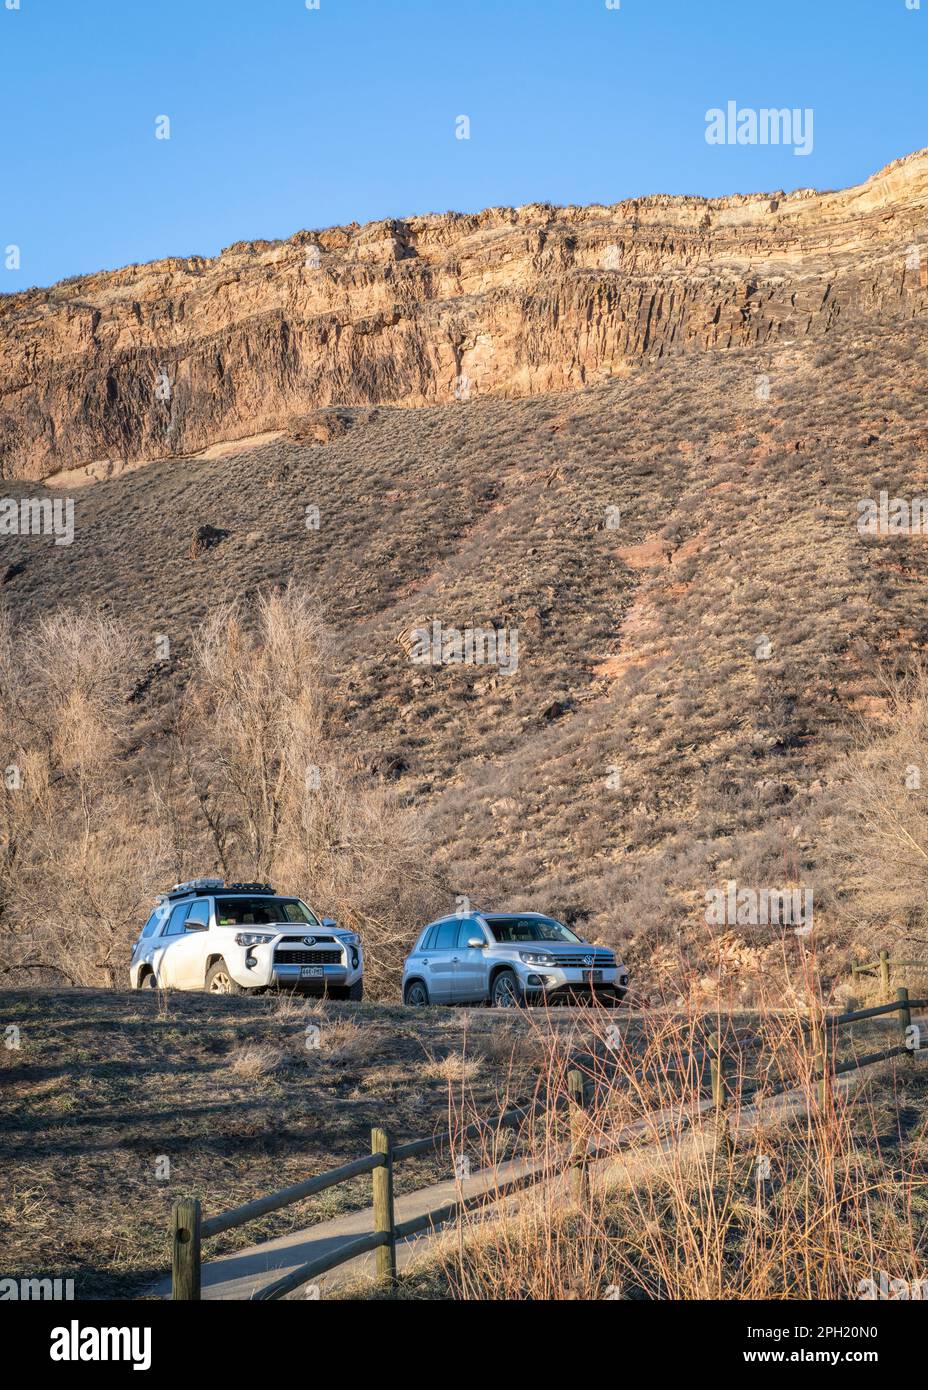 Fort Collins, CO, USA - March 16, 2023: Cars parking at Watson Lake State Wilderness Area, a popular walking and fishing spot near Fort Collins, Color Stock Photo